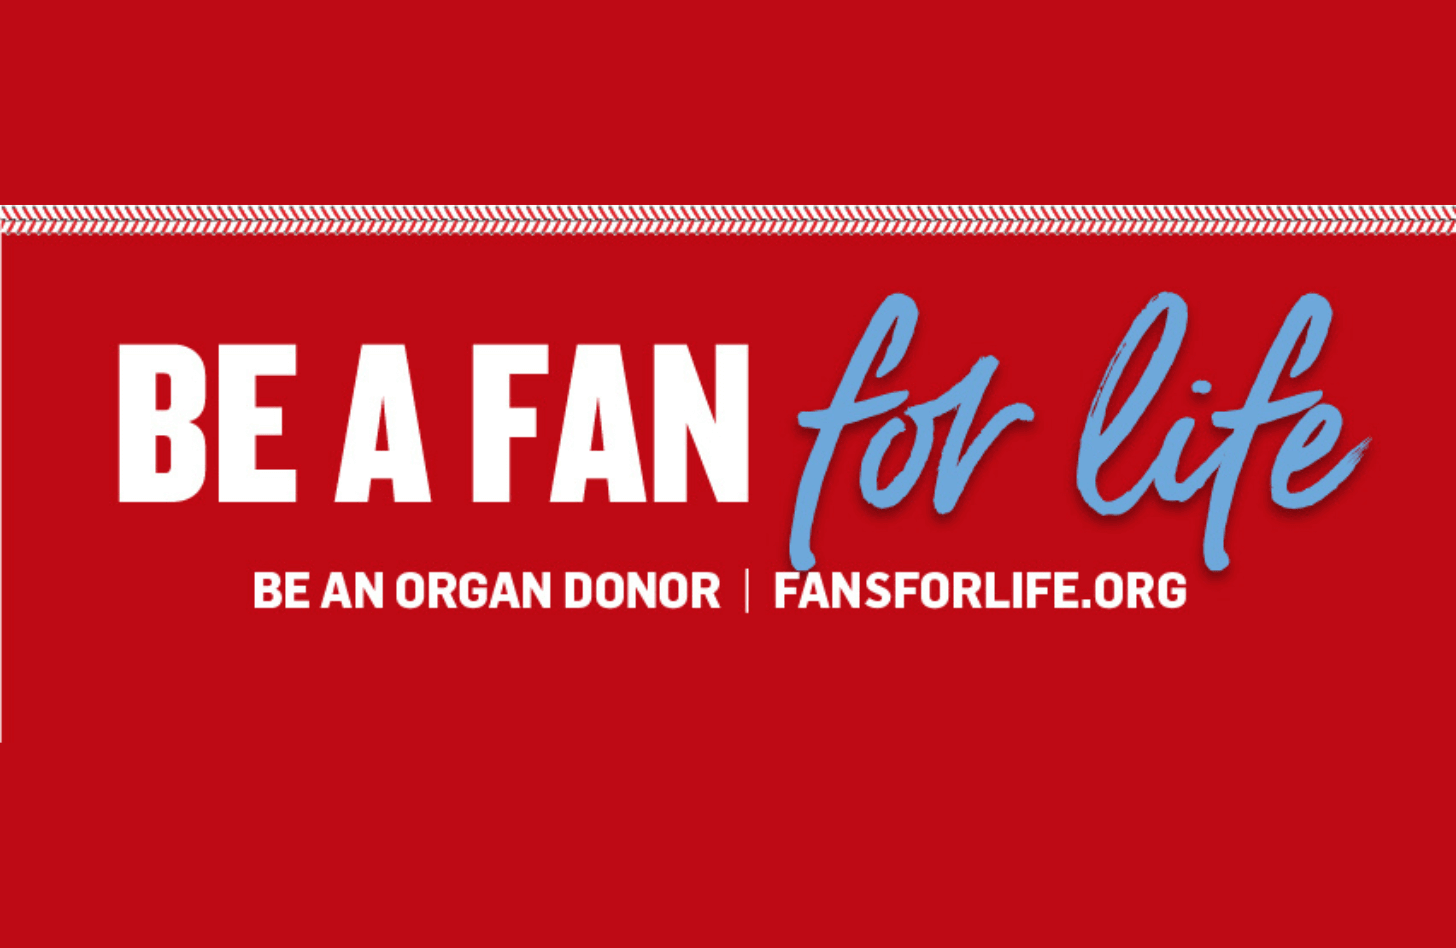 Be a fan for life - be an organ donor - FansForLife.org